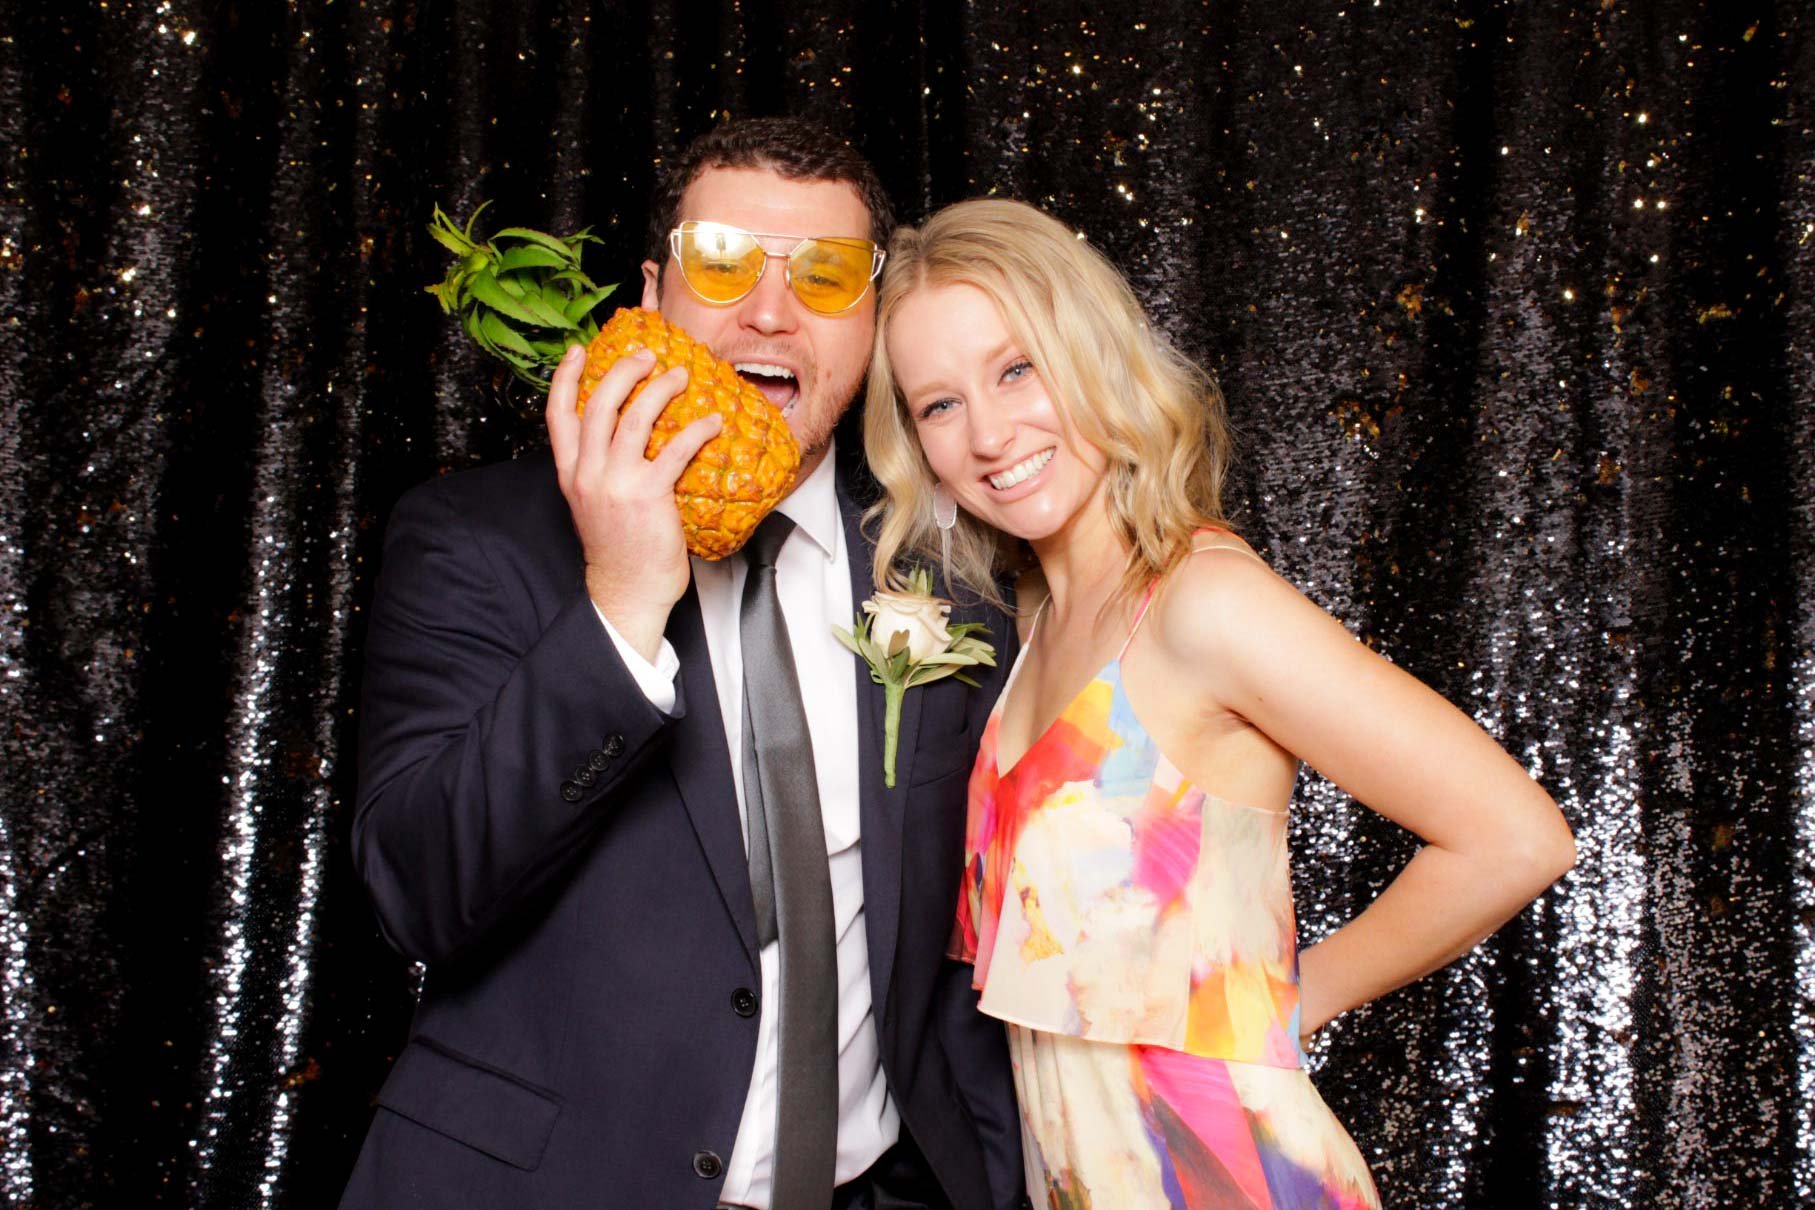 Hawaii wedding party photobooth prices cost packages oahu hawaii (77).JPG